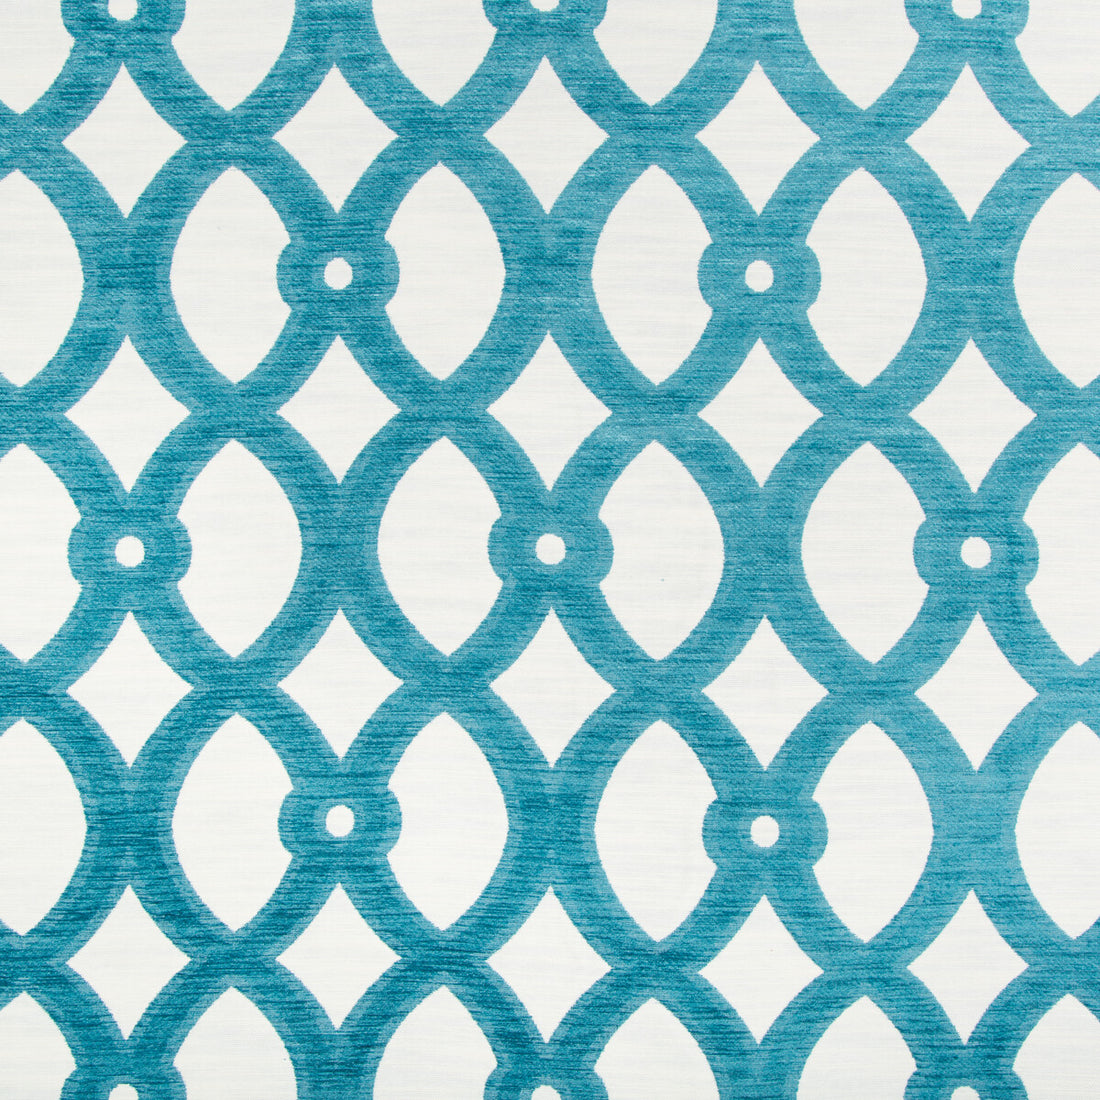 Kravet Contract fabric in 34759-15 color - pattern 34759.15.0 - by Kravet Contract in the Incase Crypton Gis collection